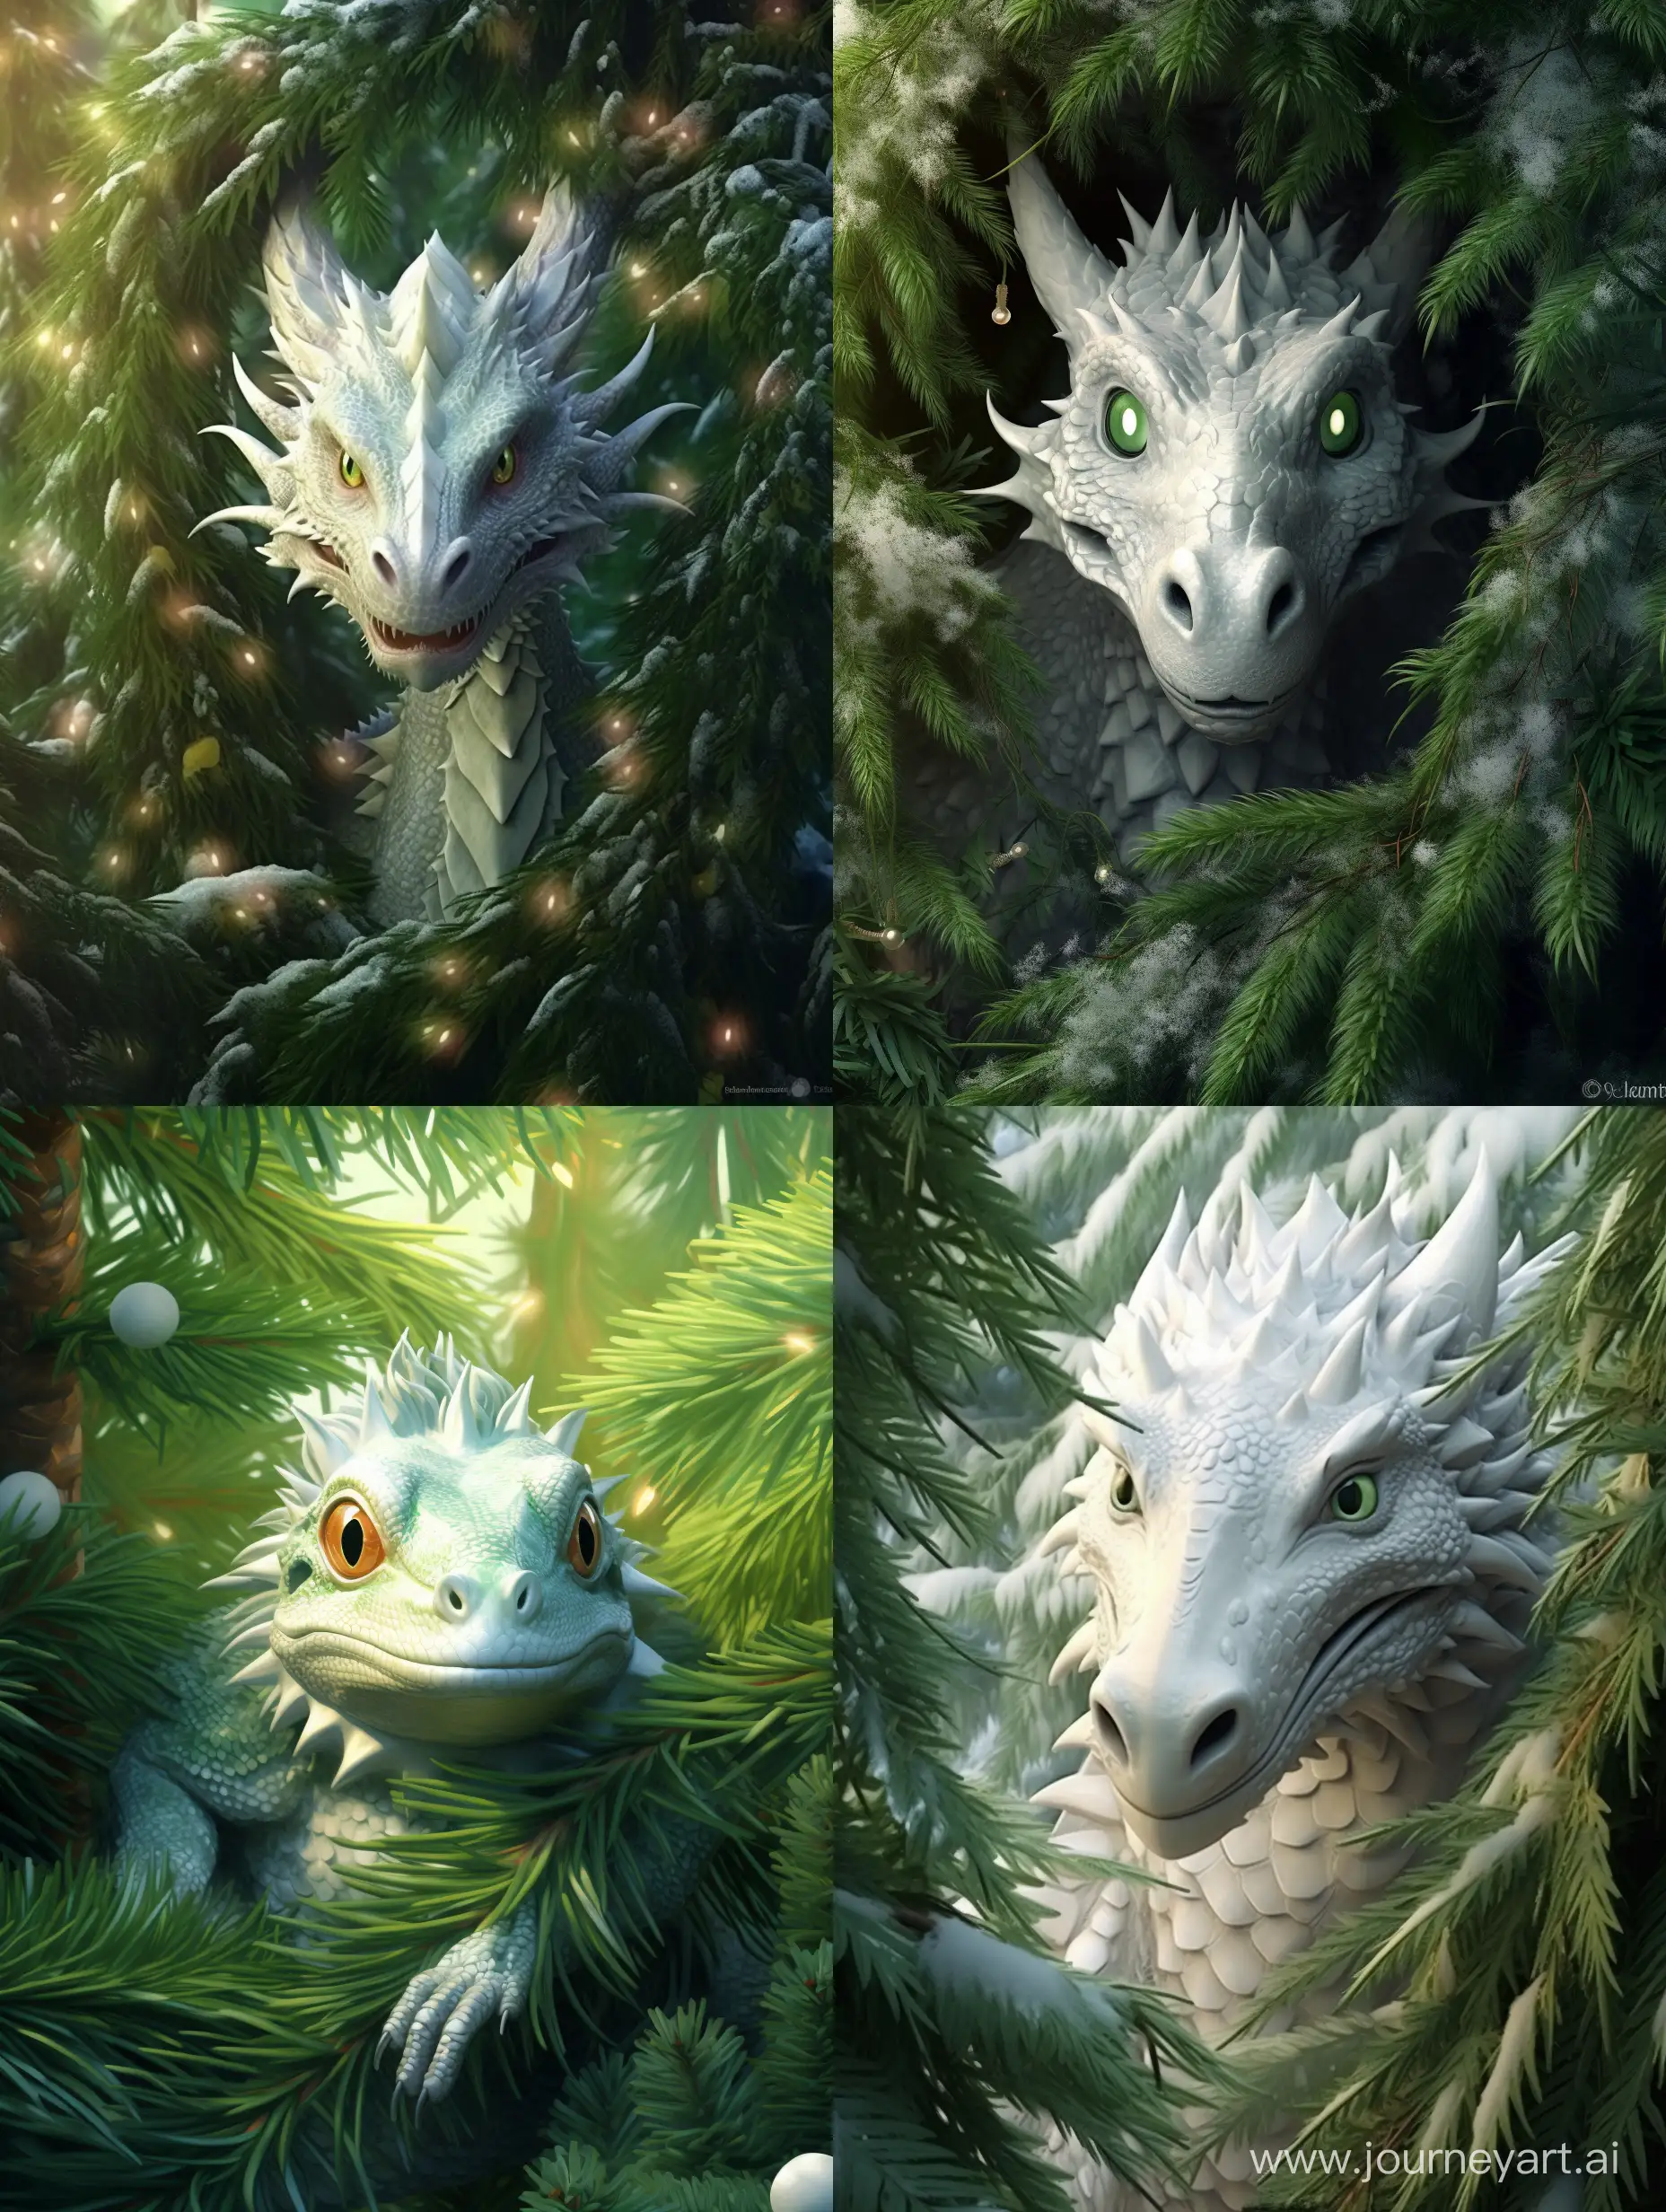 Enchanting-Green-Dragon-in-Magical-Christmas-Forest